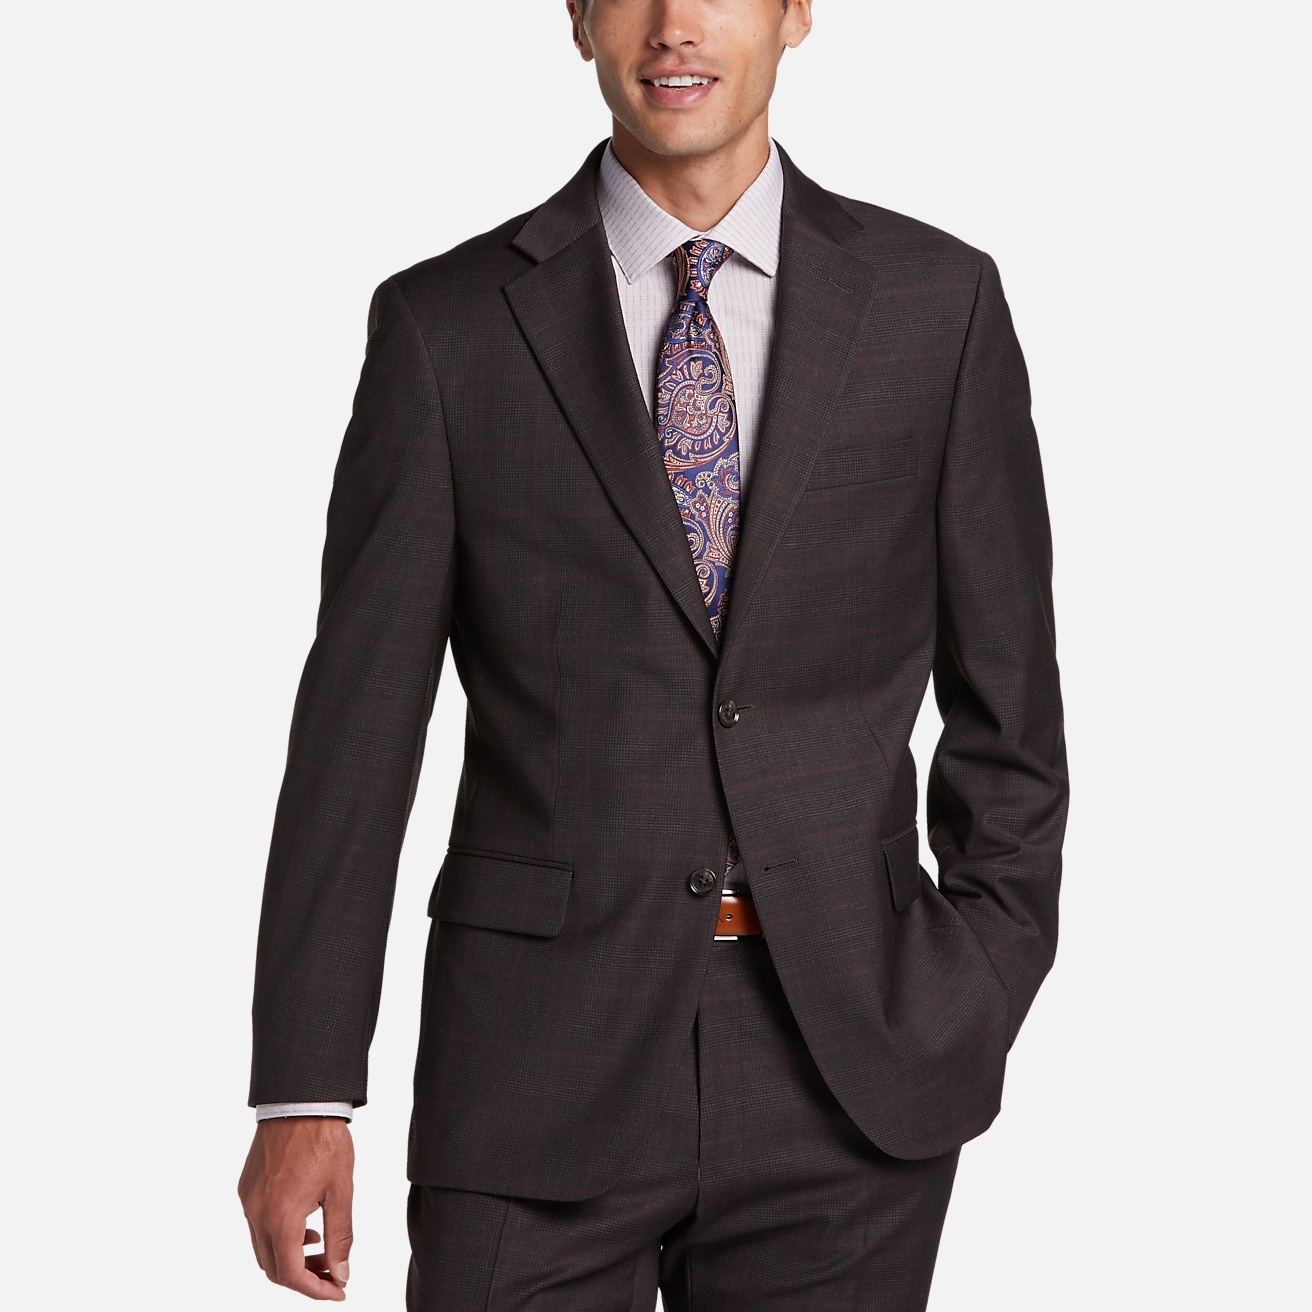 https://image.menswearhouse.com/is/image/TMW/TMW_3WYP_63_TOMMY_HILFIGER_2_PIECE_SUITS_BROWN_PLAID_MAIN?imPolicy=pdp-mob-2x